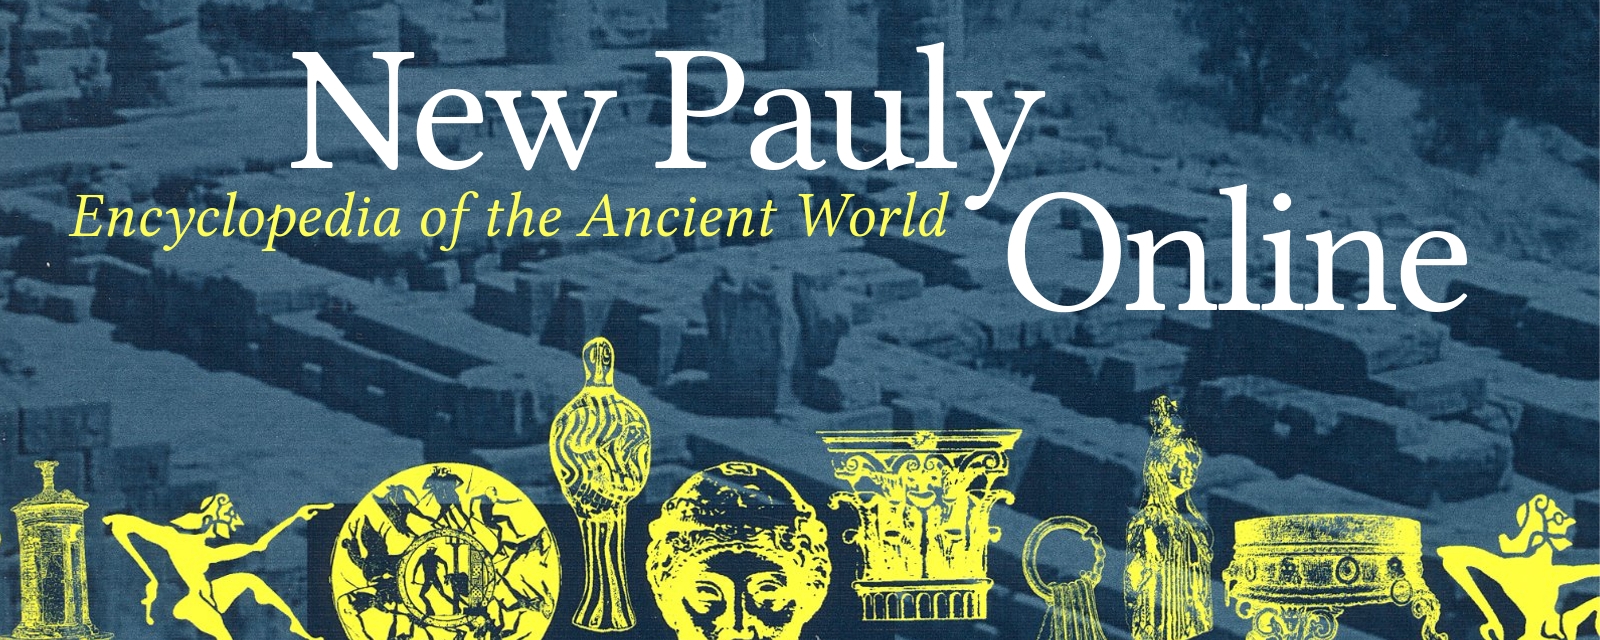 New Pauly Online